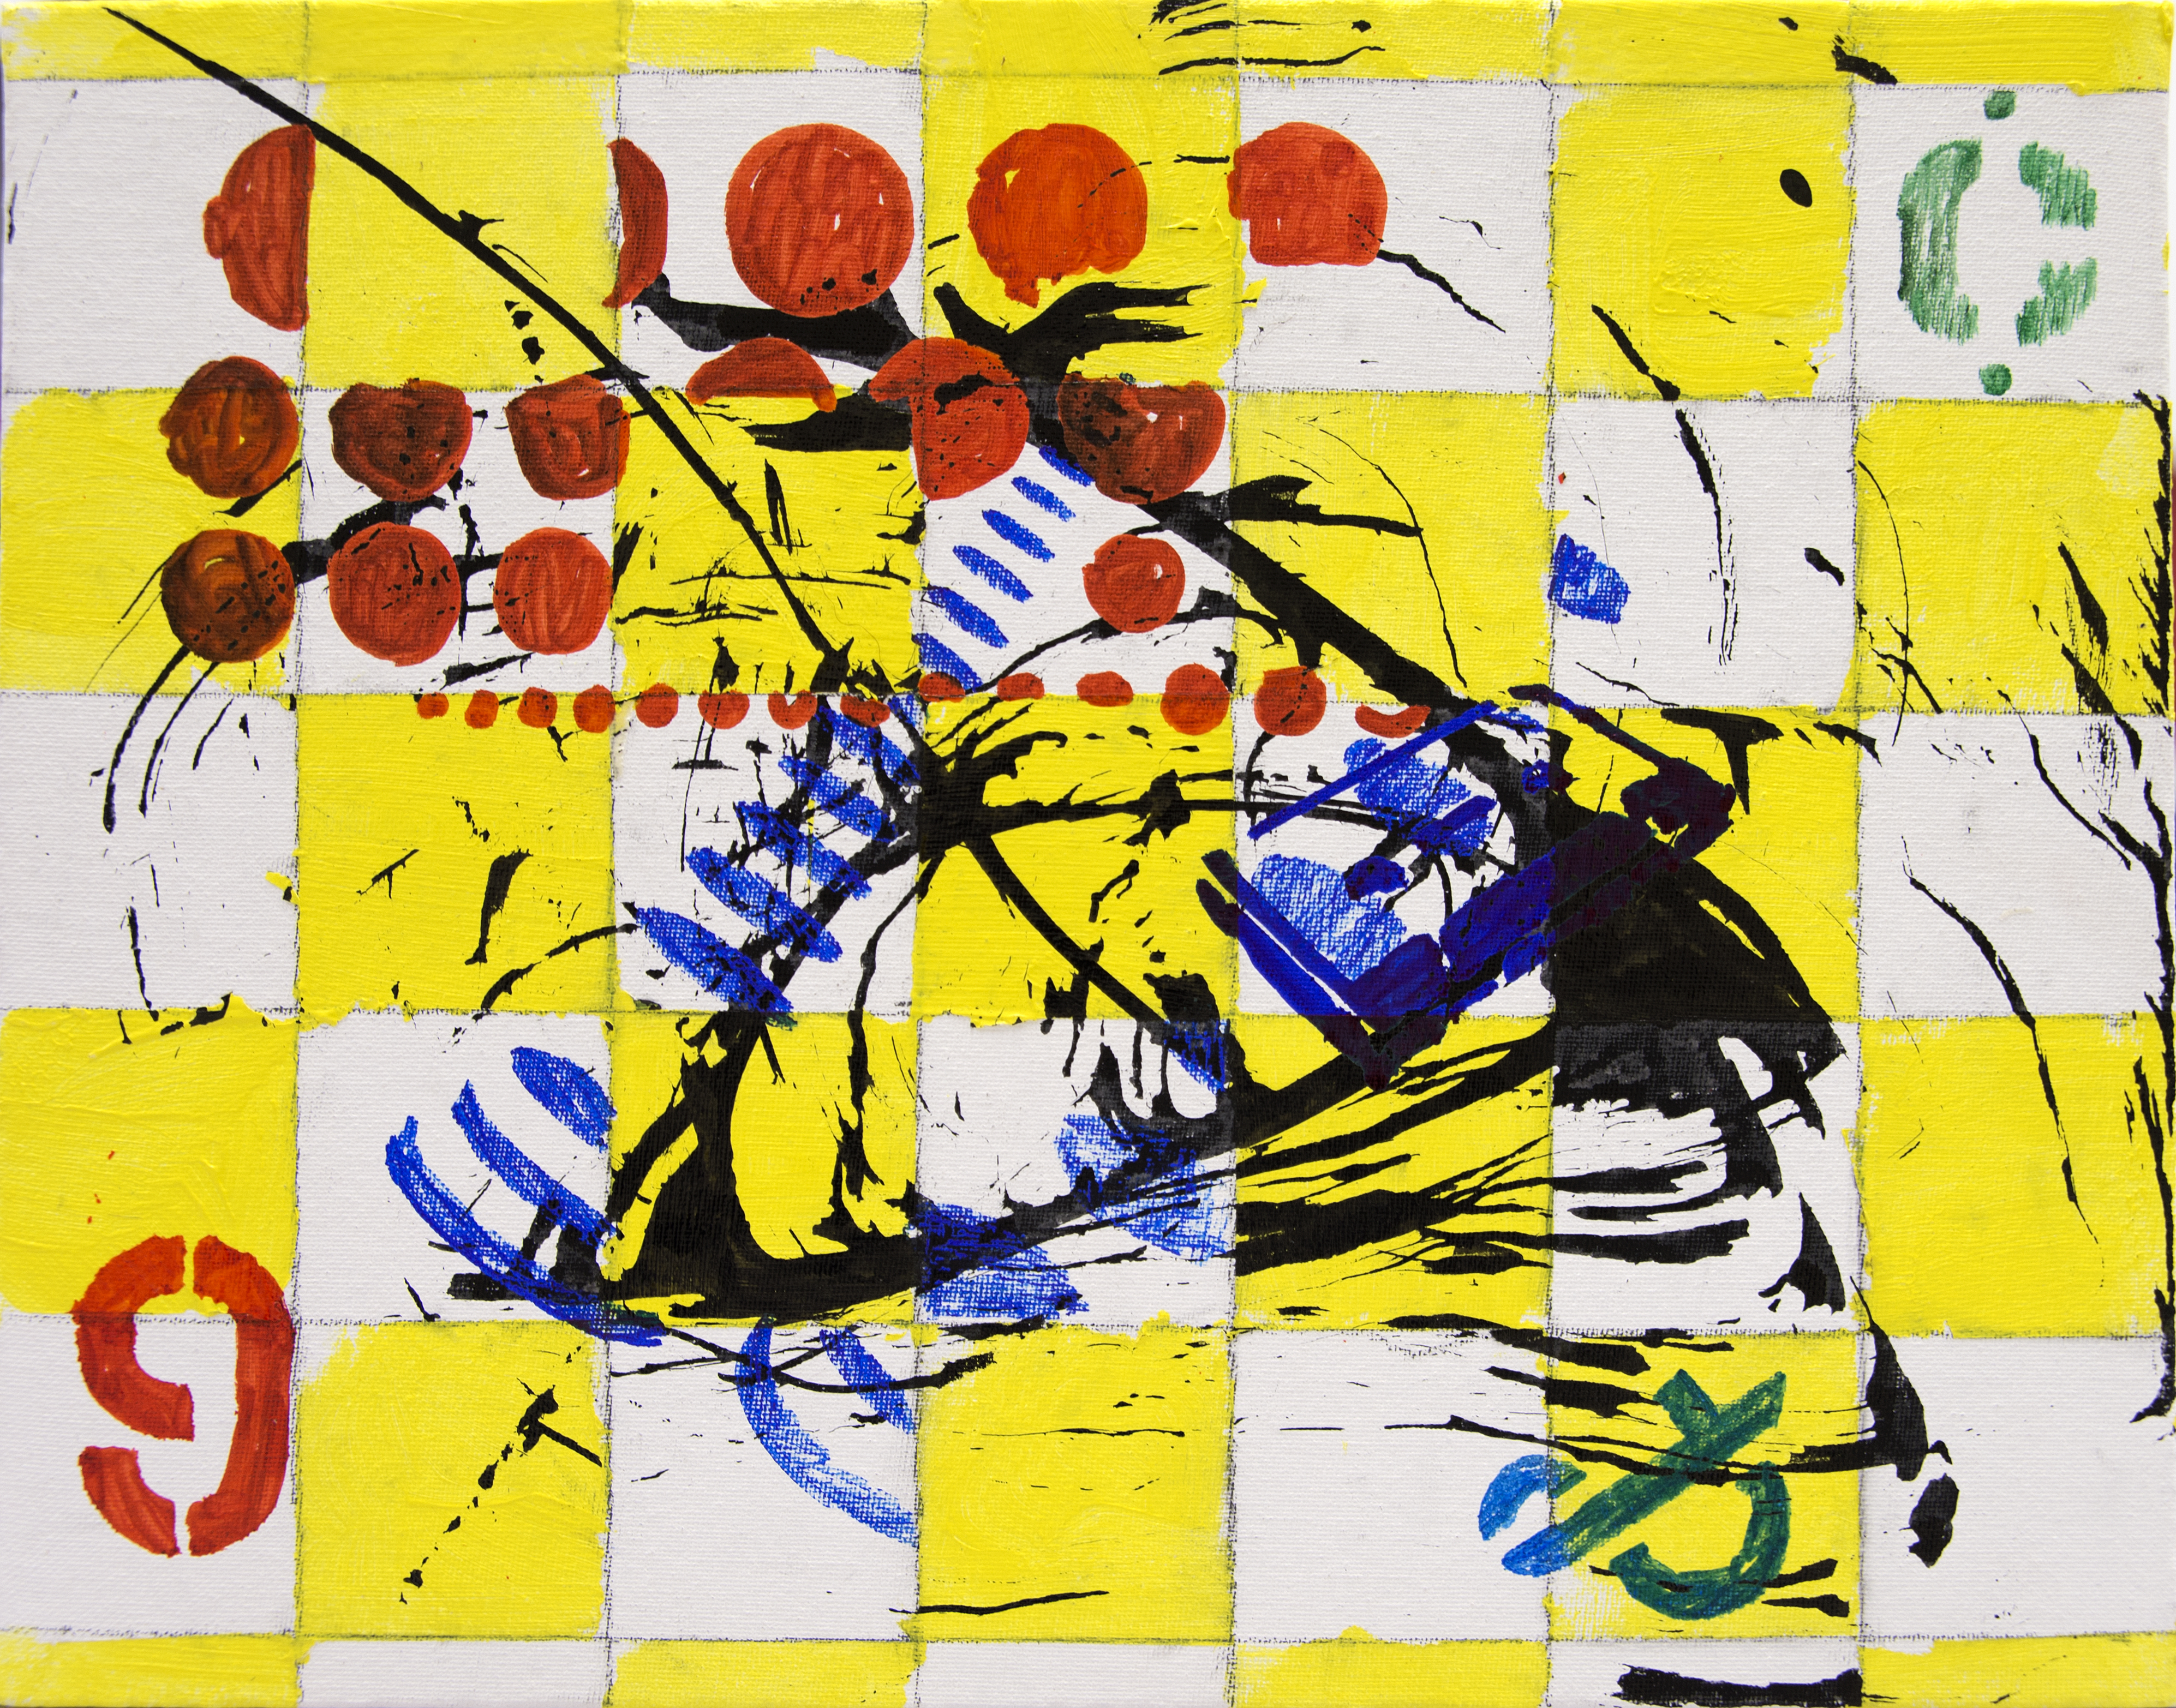 Bright yellow checkerboard background against which stenciled numbers and letters, red circles, and blue and black splotches have been painted